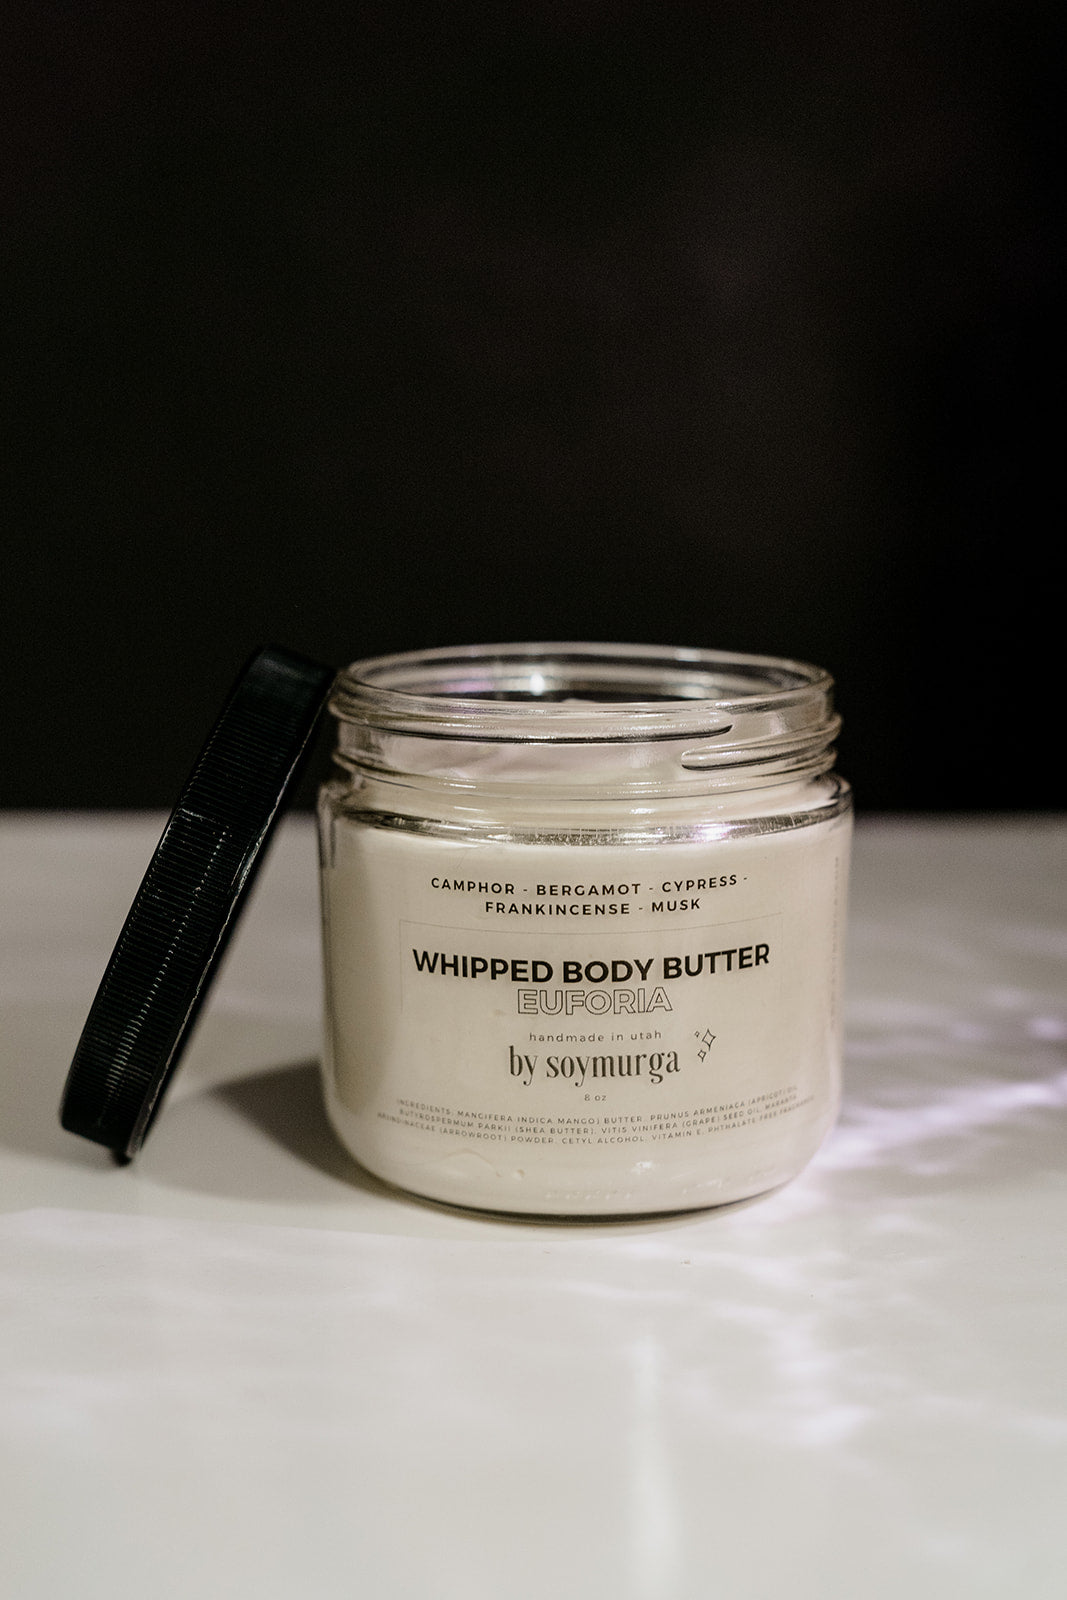 Euforia Whipped Body Butter